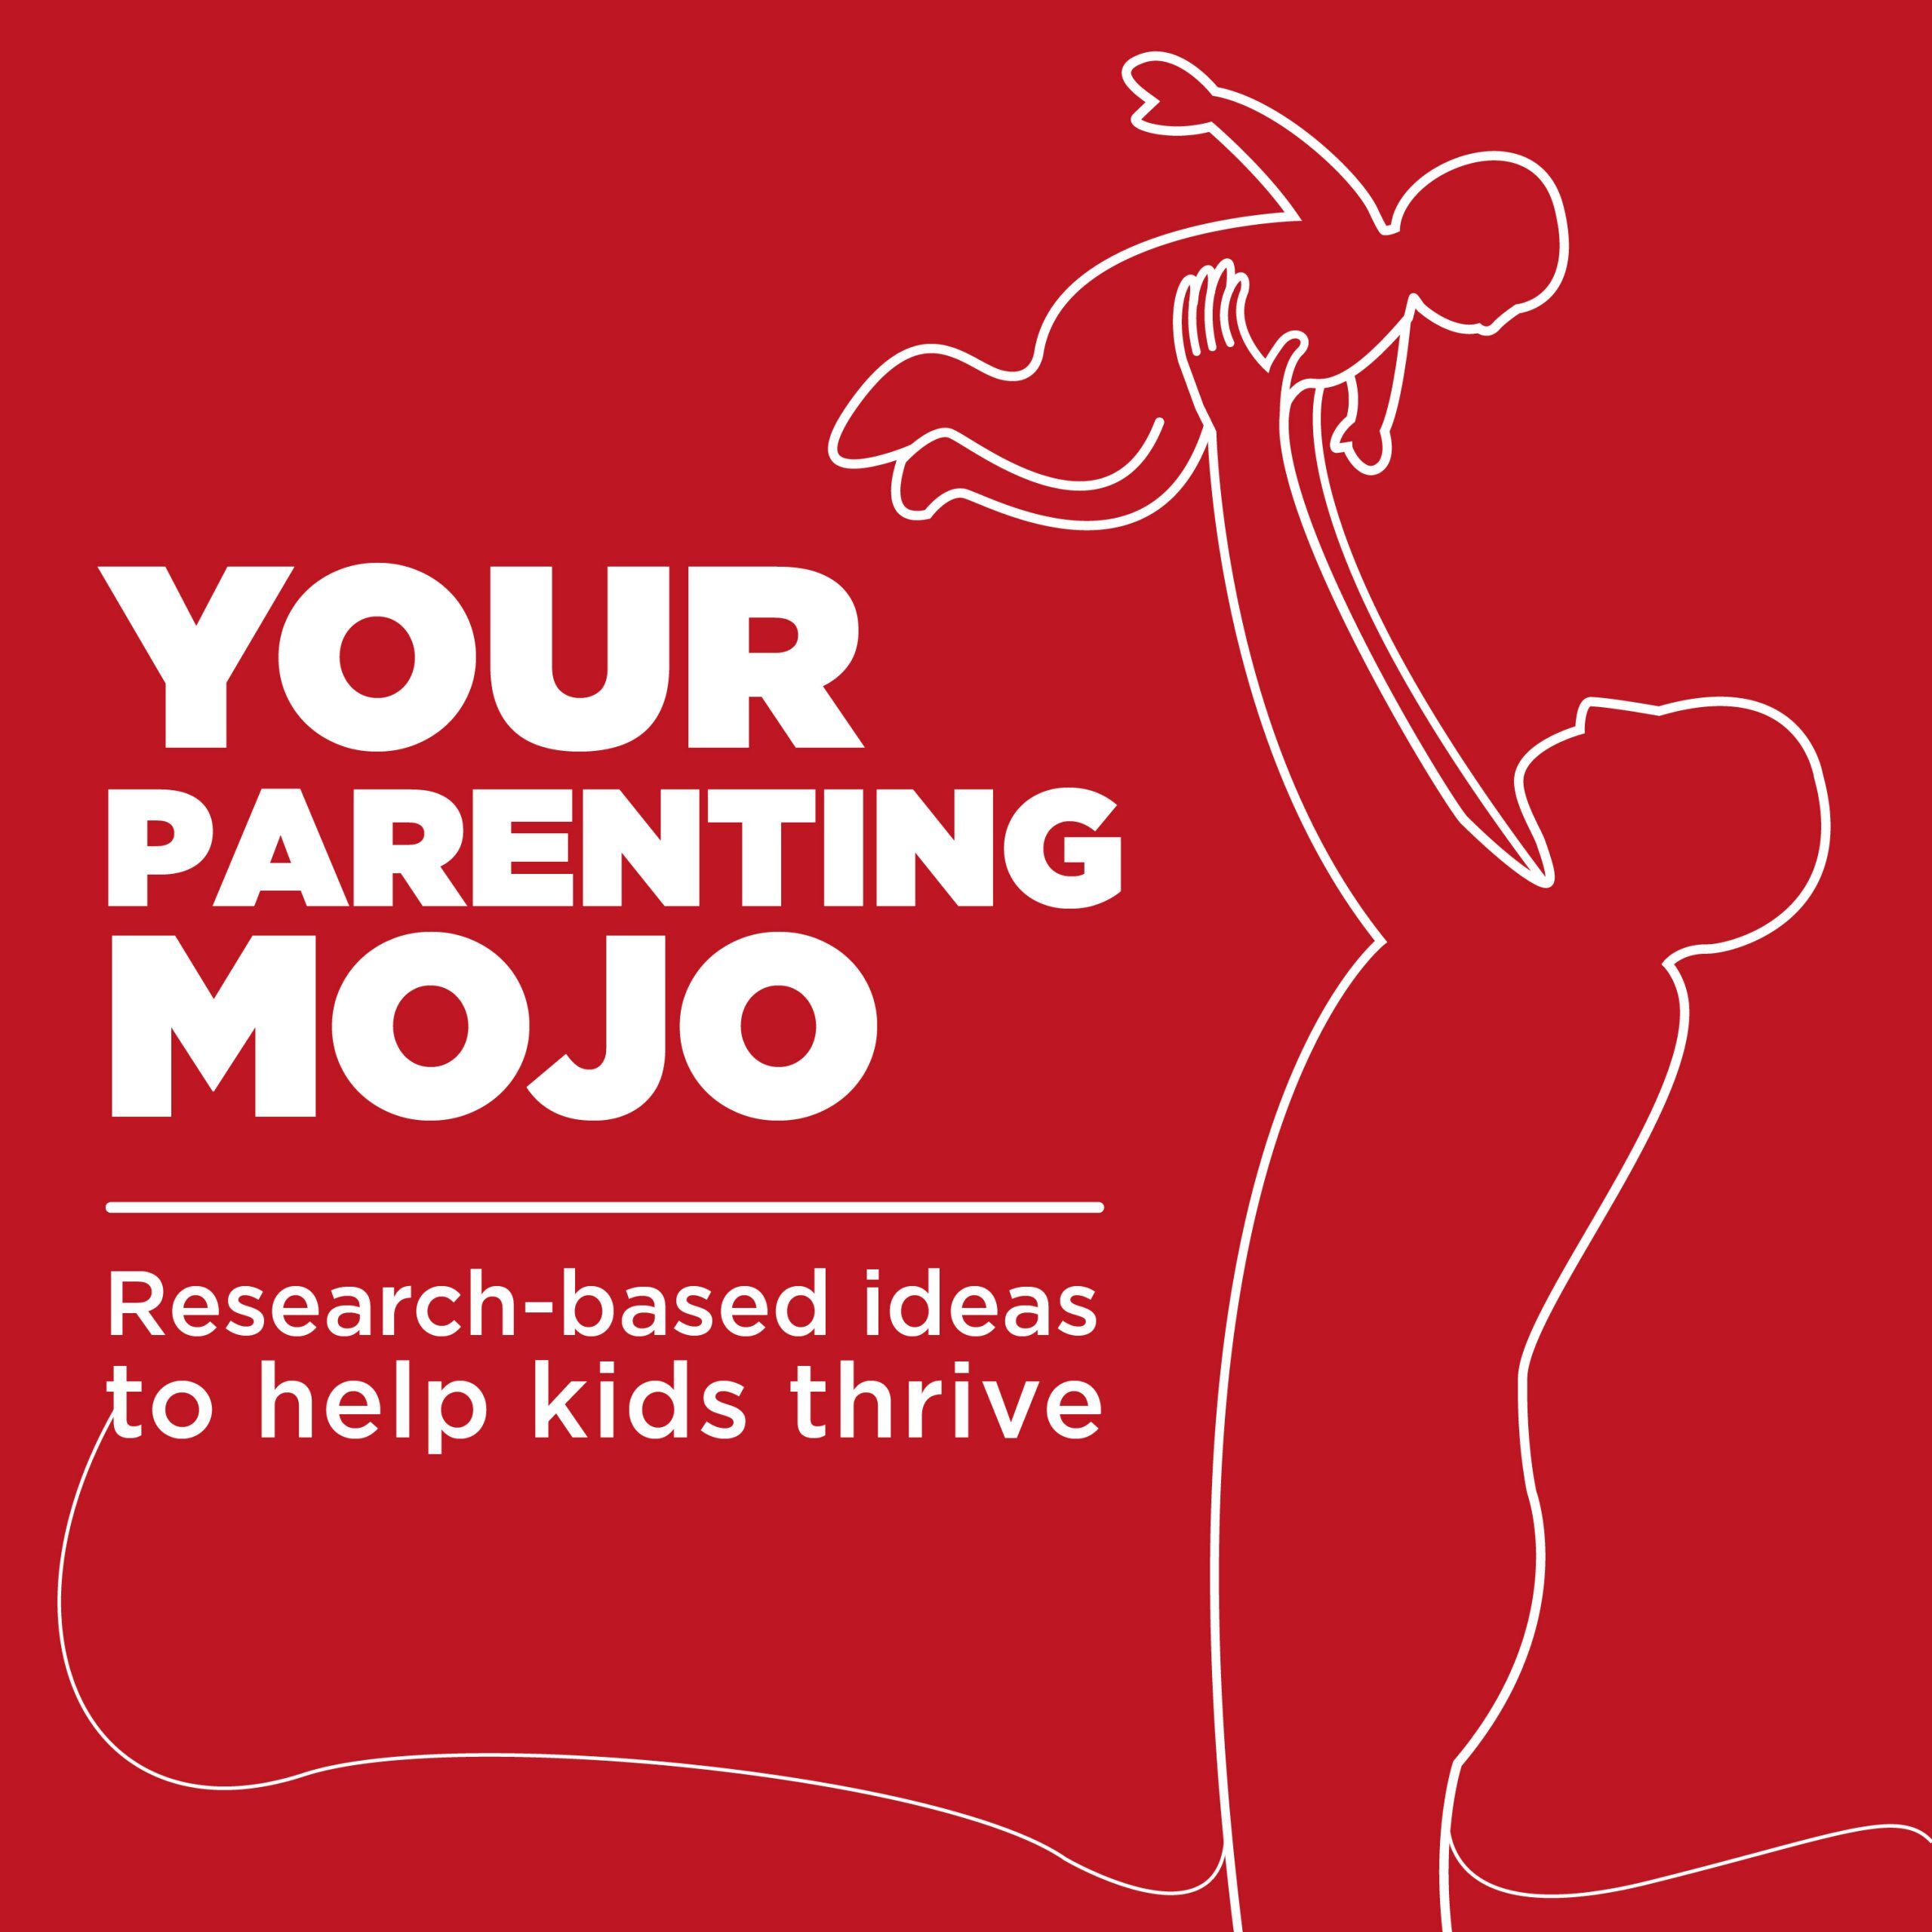 Artwork for podcast Your Parenting Mojo - Respectful, research-based parenting ideas to help kids thrive